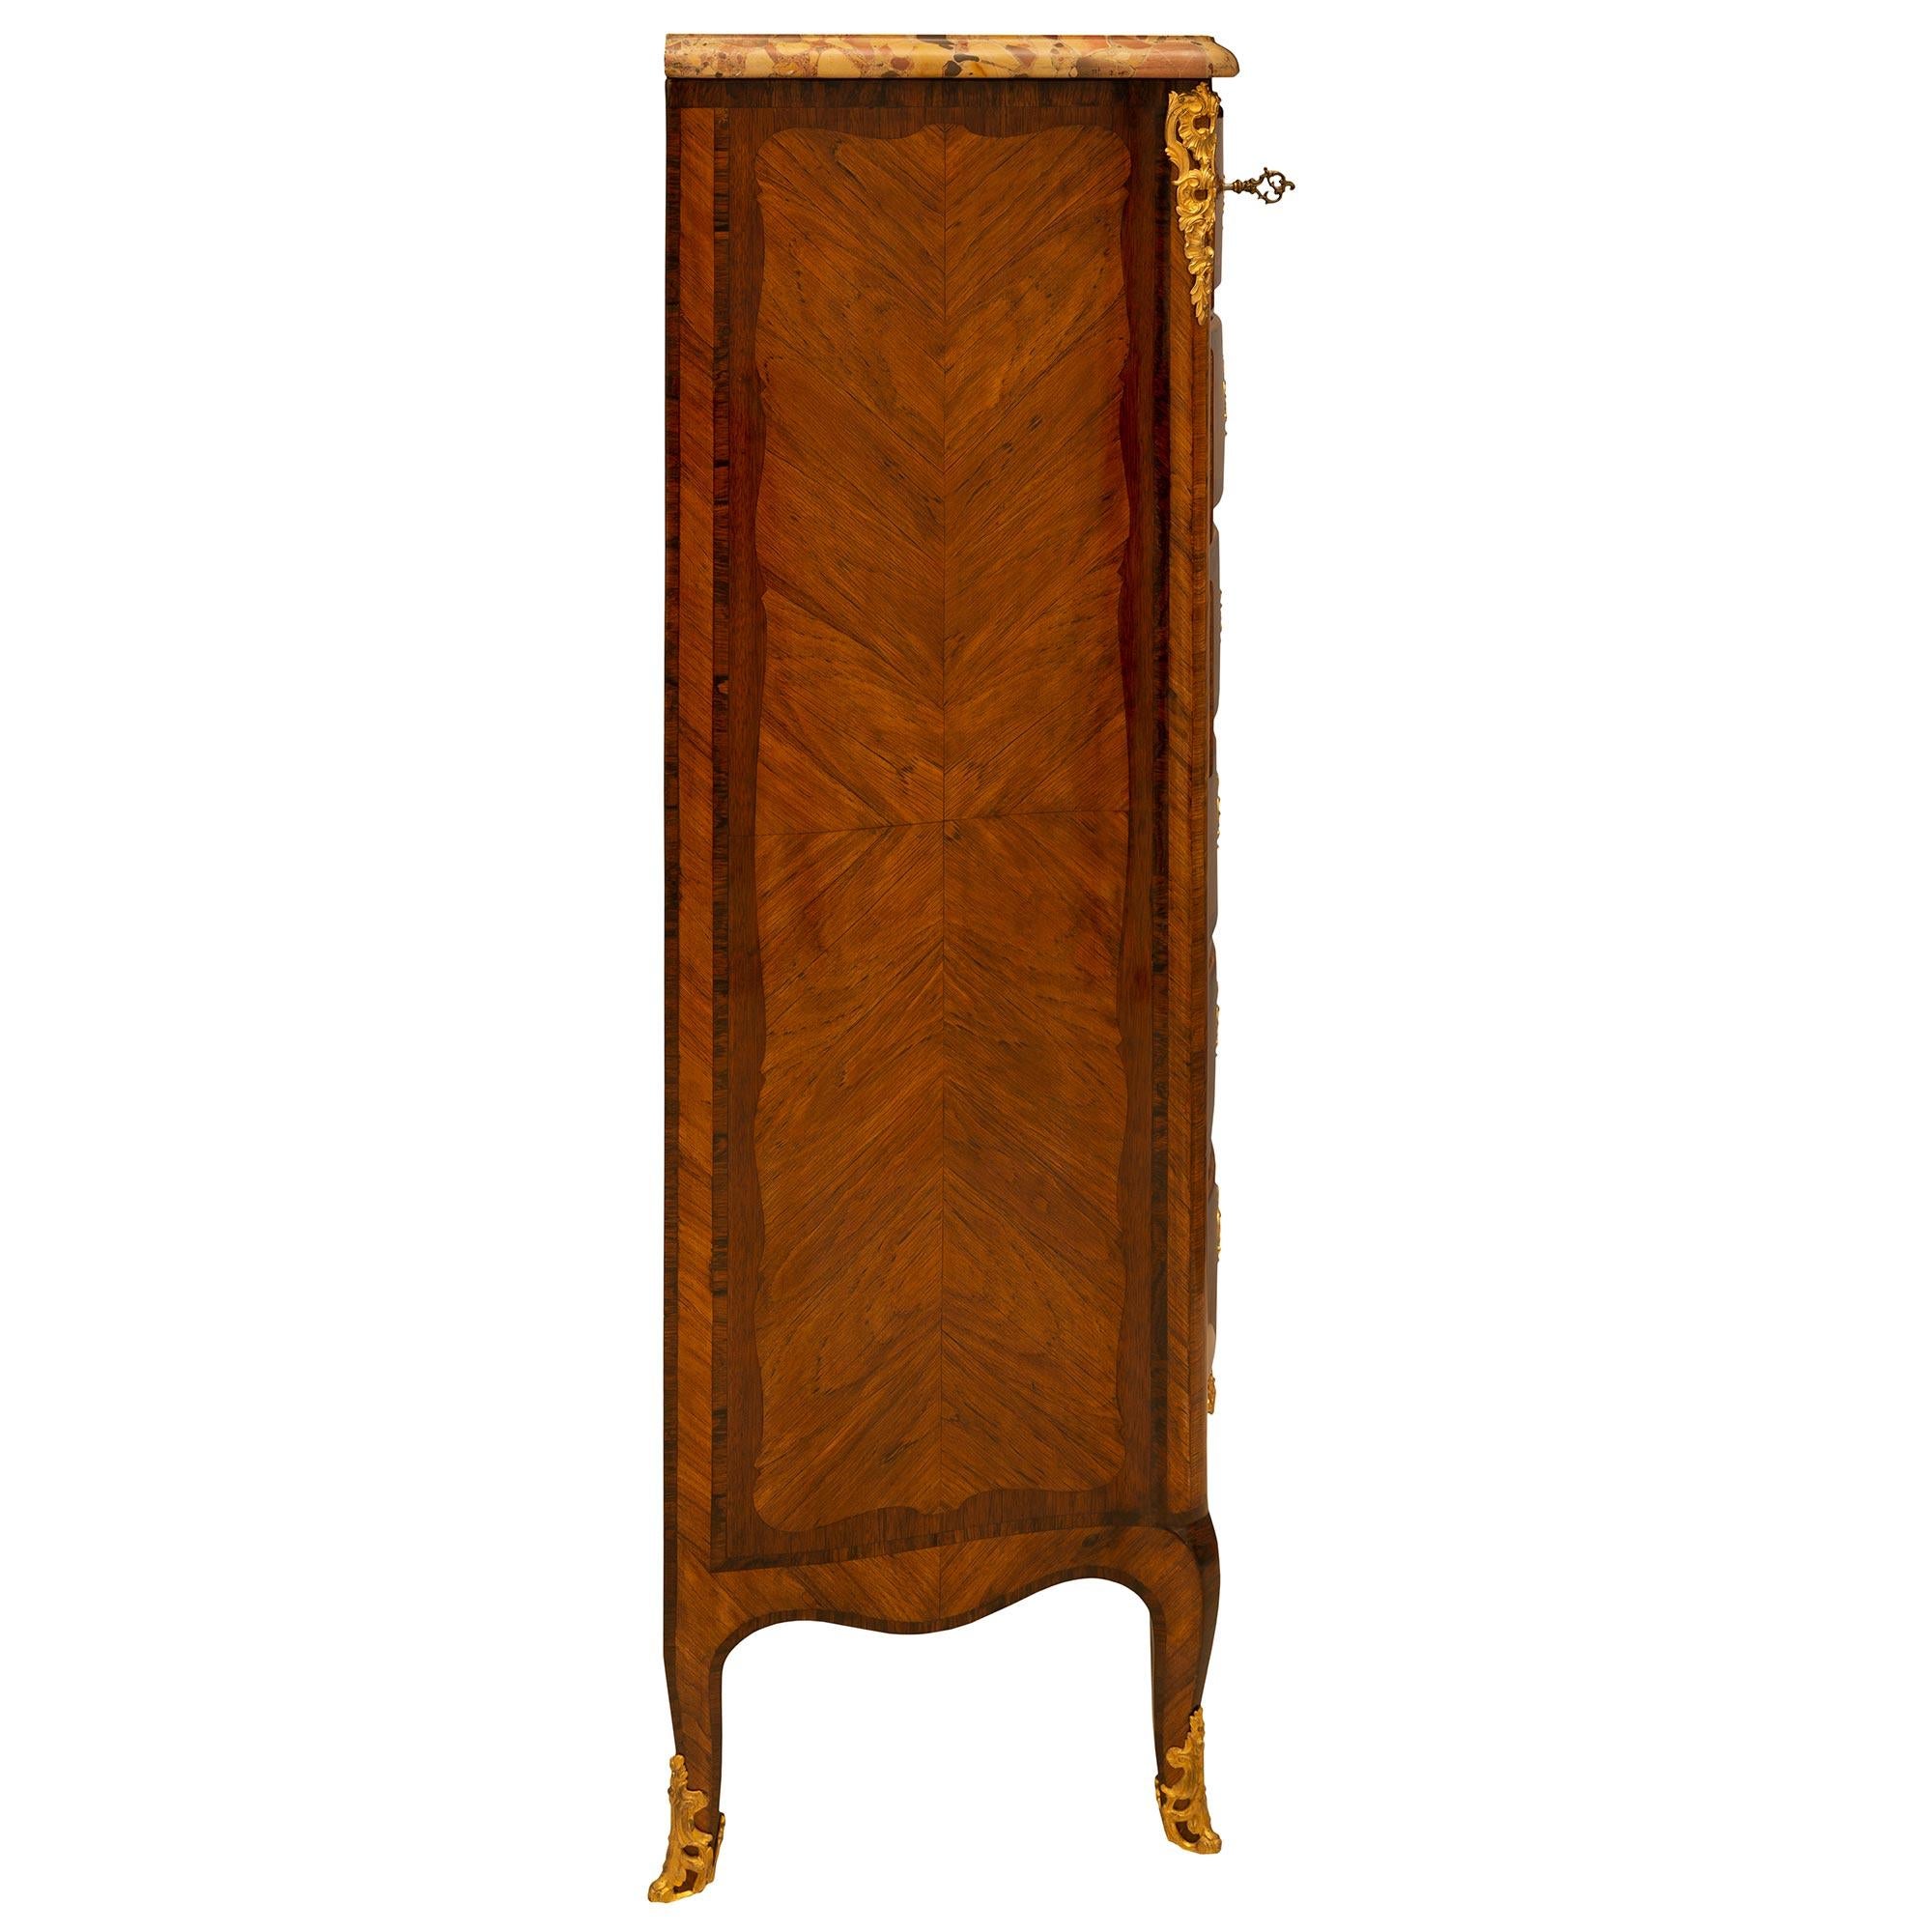 French 19th Century Transitional Style Kingwood and Ormolu Six Drawer Chiffonier For Sale 2